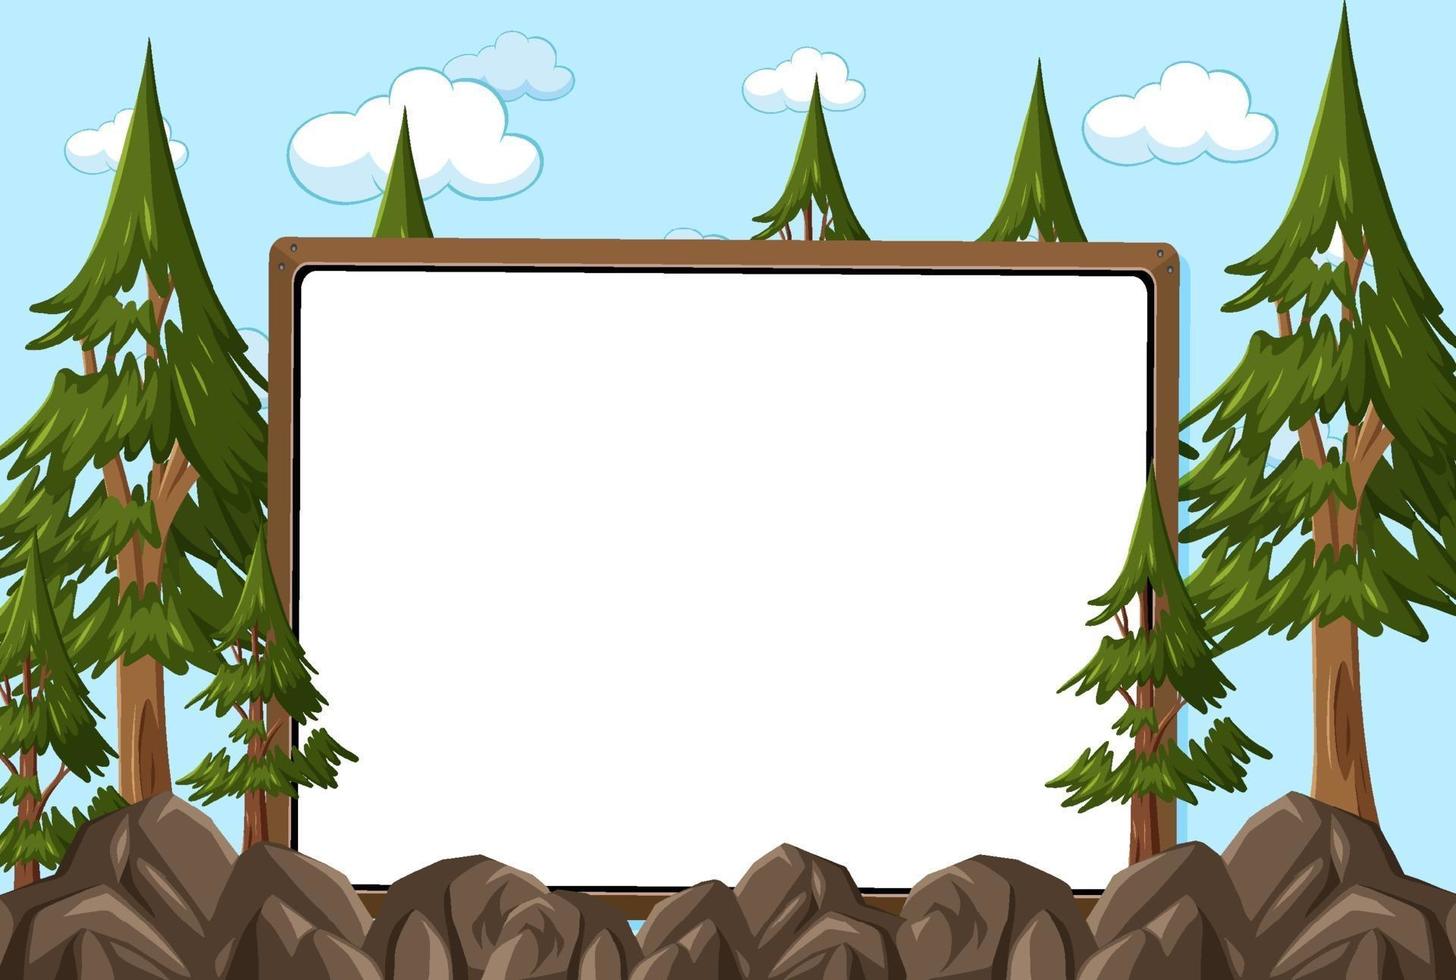 Empty board on sky background with many pine trees vector